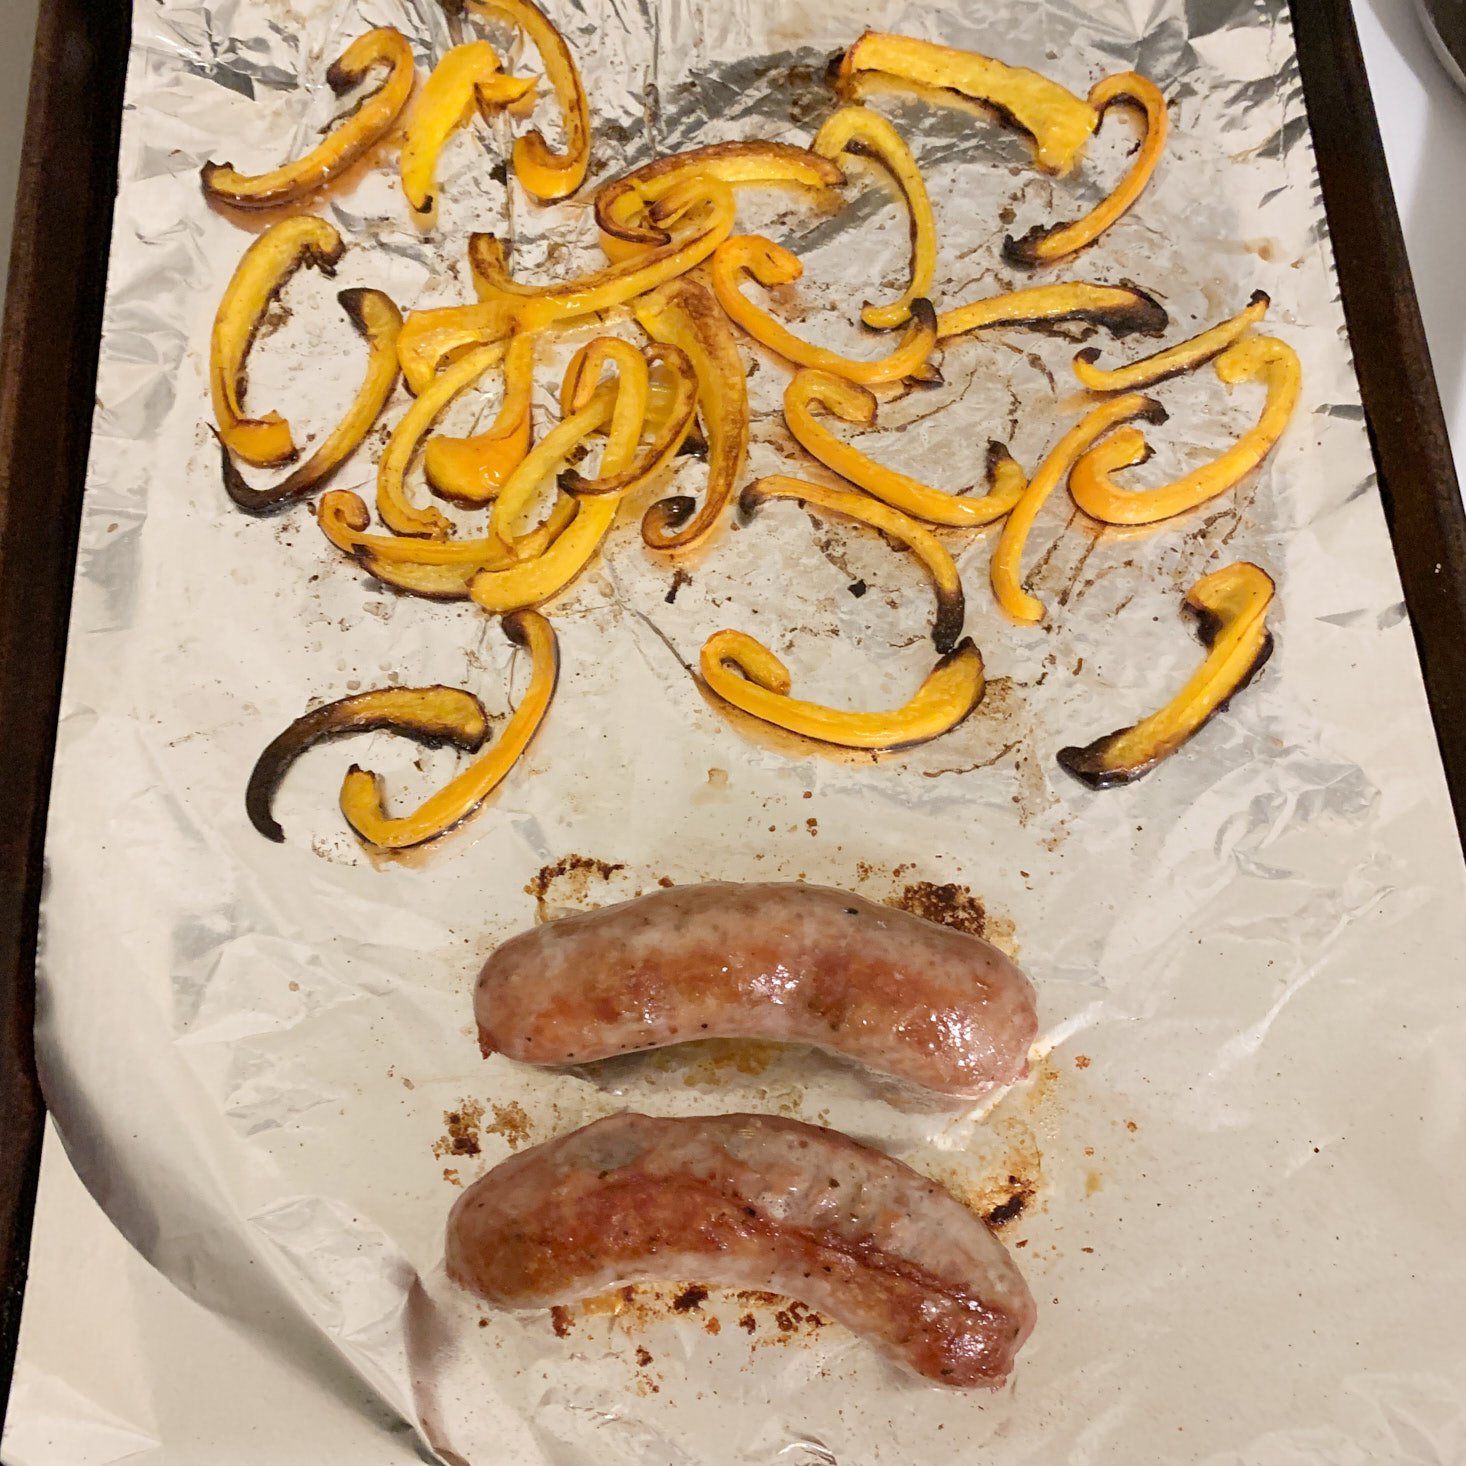 Cooked sausages and peppers on baking sheet